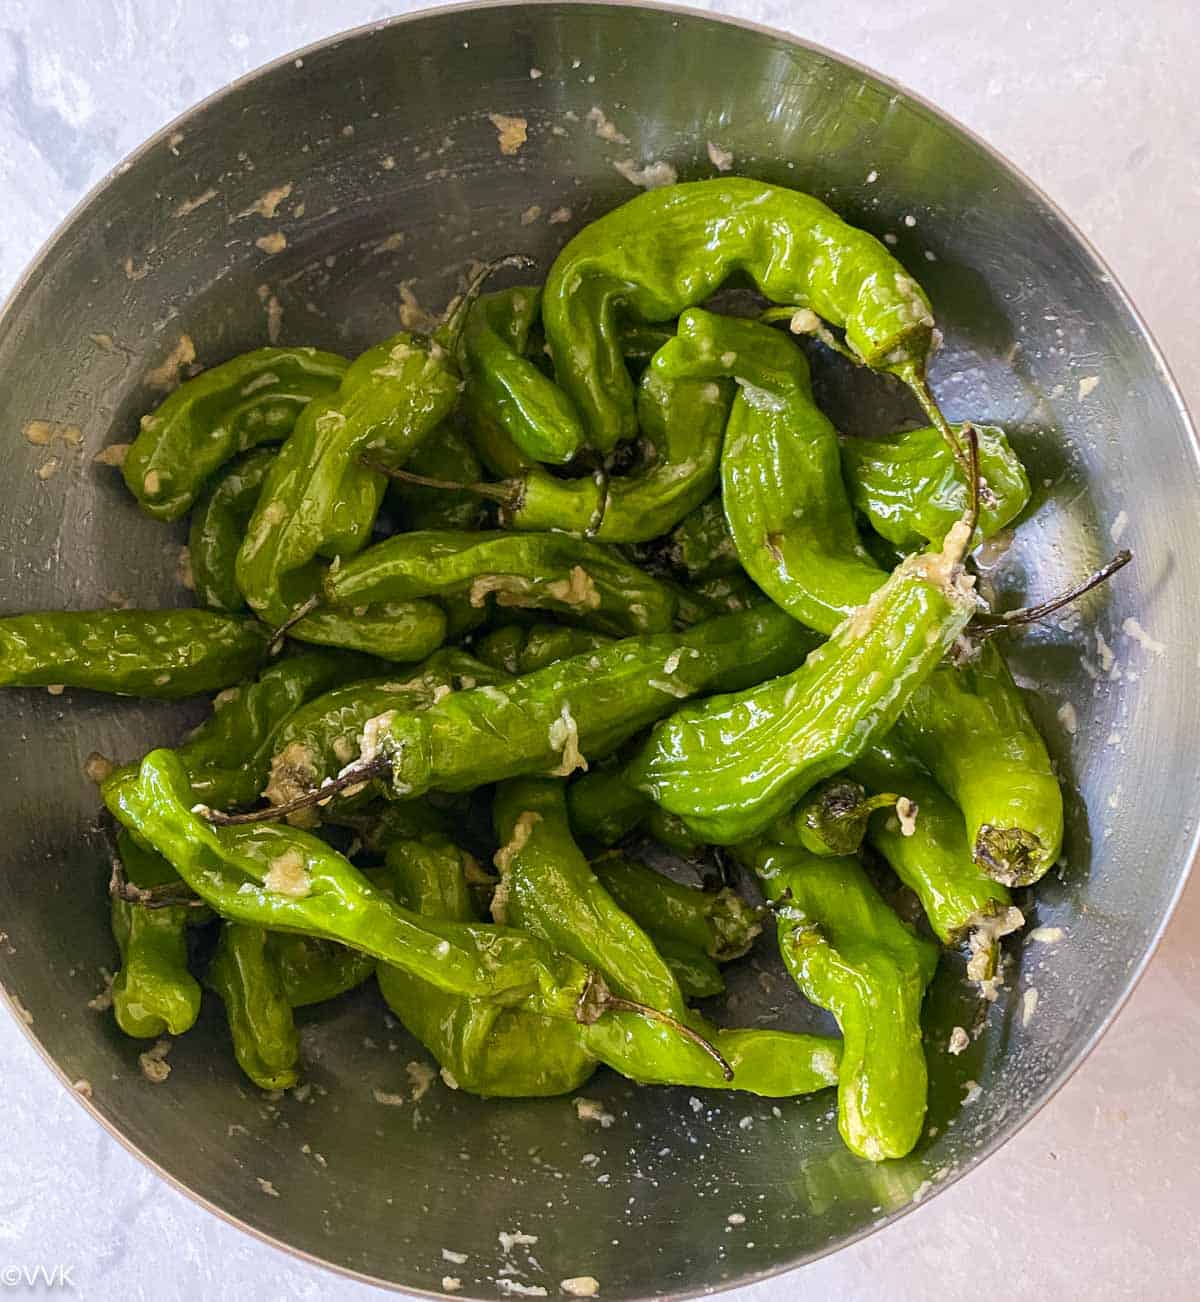 shishito peppers coated with oil, salt and garlic